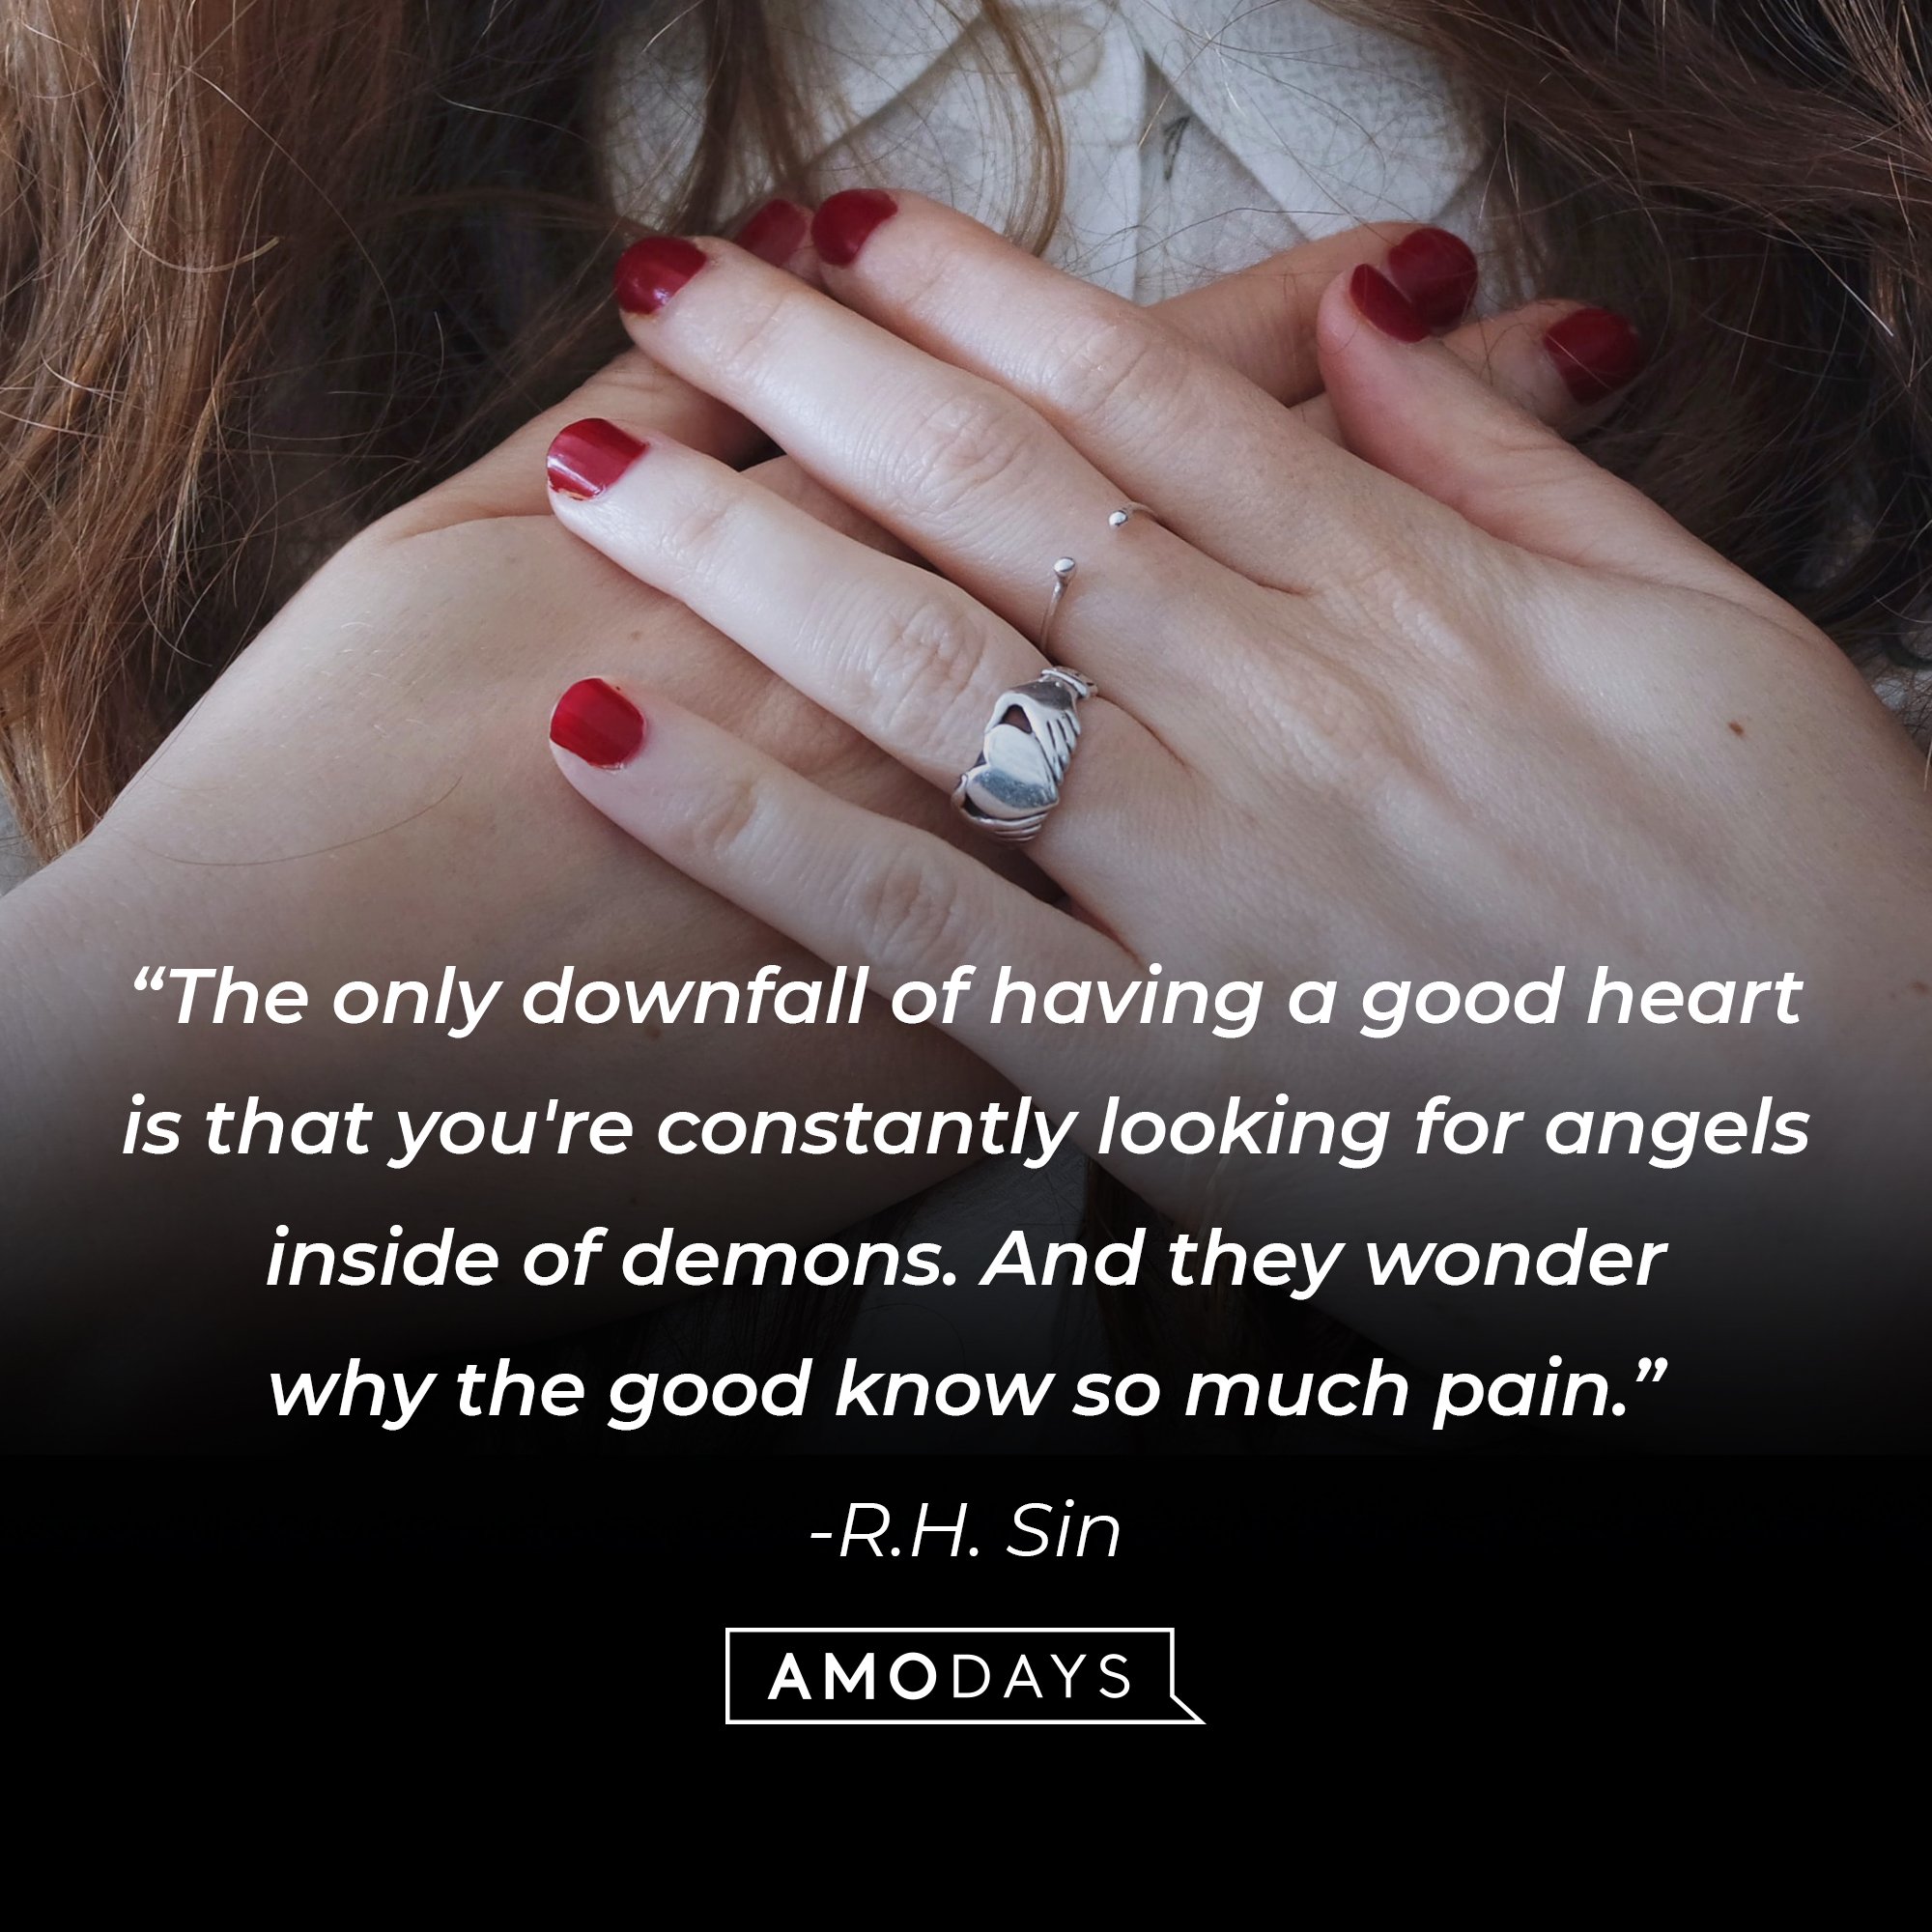 R.H. Sin's quote: "The only downfall of having a good heart is that you're constantly looking for angels inside of demons. And they wonder why the good know so much pain." | Image: AmoDays